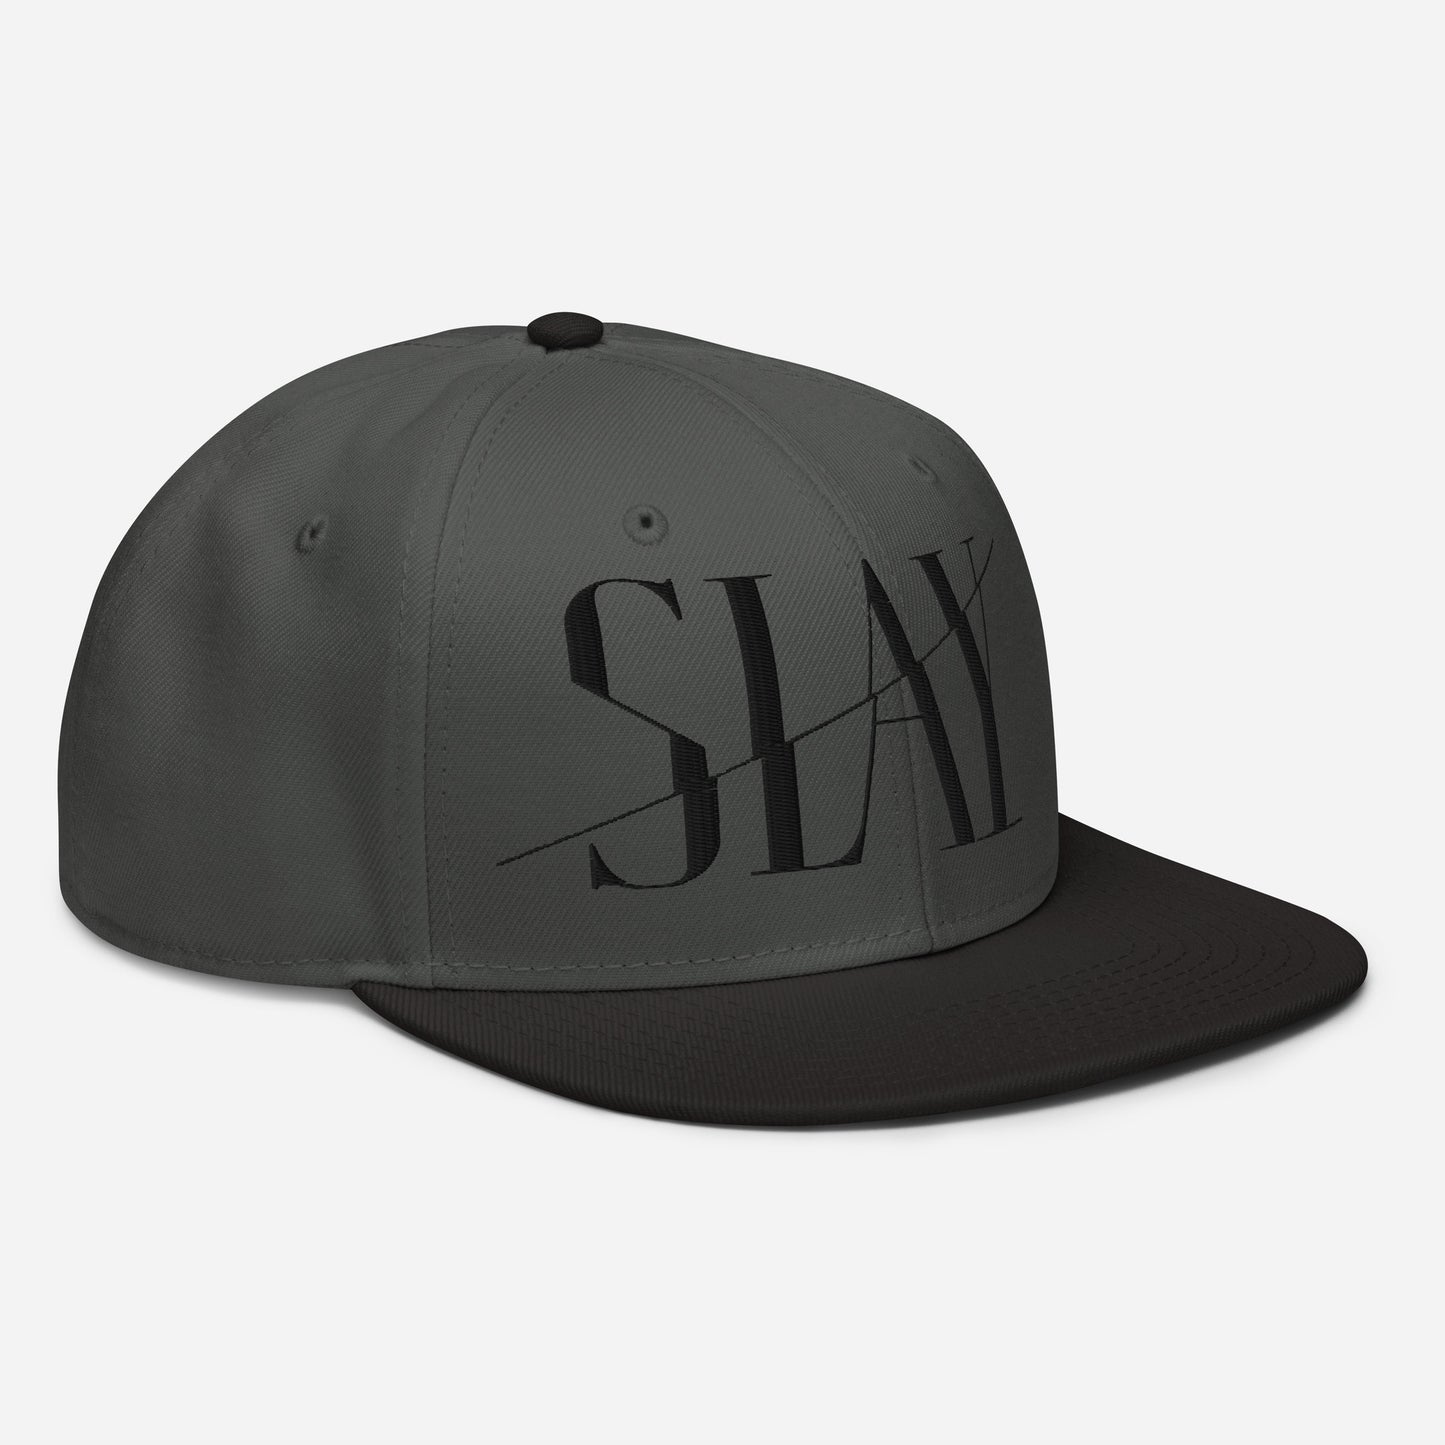 A black and grey Snapback Hat with the word "SLAY" embroidered on the front.